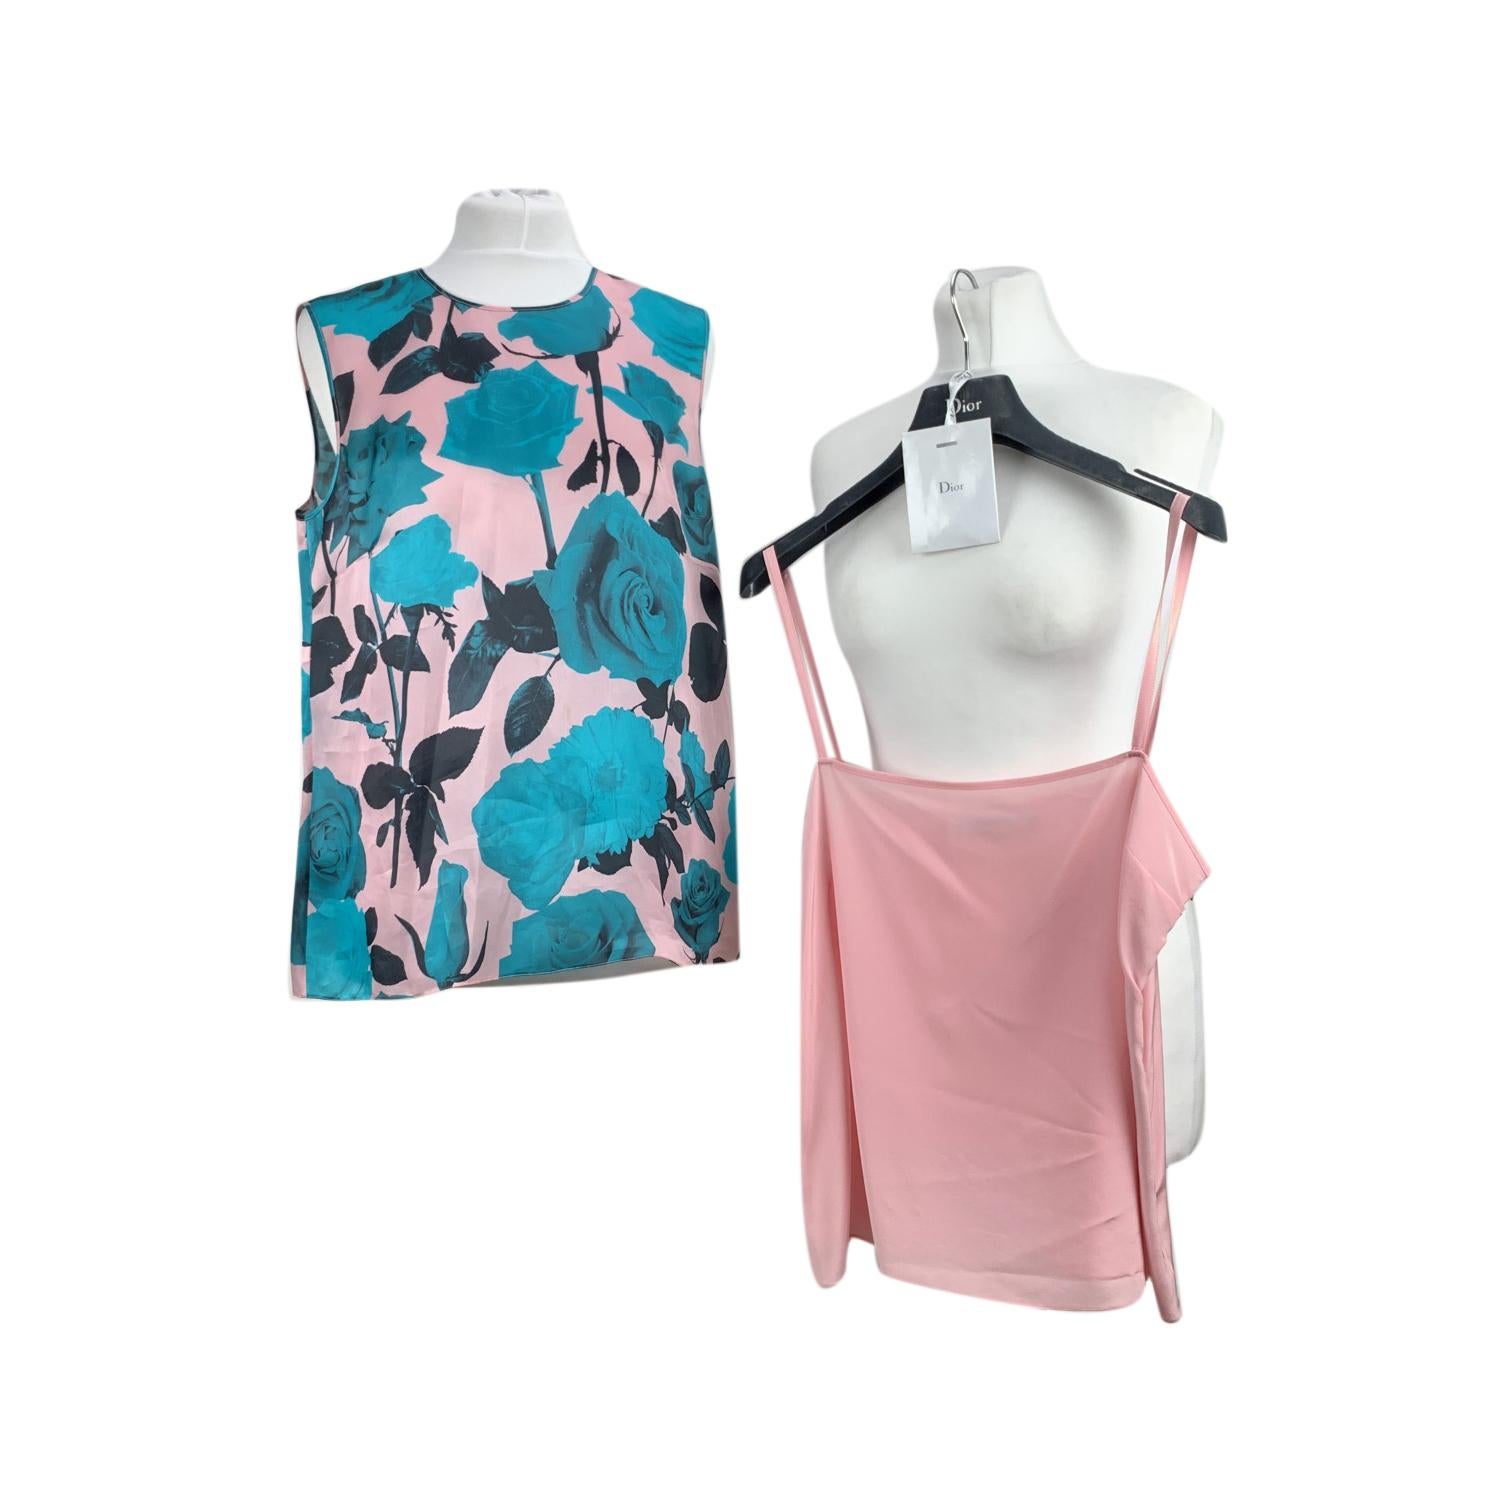 Beautiful Christian Dior pink and teal flotal shell top with camitop underlay. Composition: 100% Silk. Side zip closure. Round neckline Size:40 FR,, 12 GB, 44 IT, 38 D, 8 USA (The size shown for this item is the size indicated by the designer on the